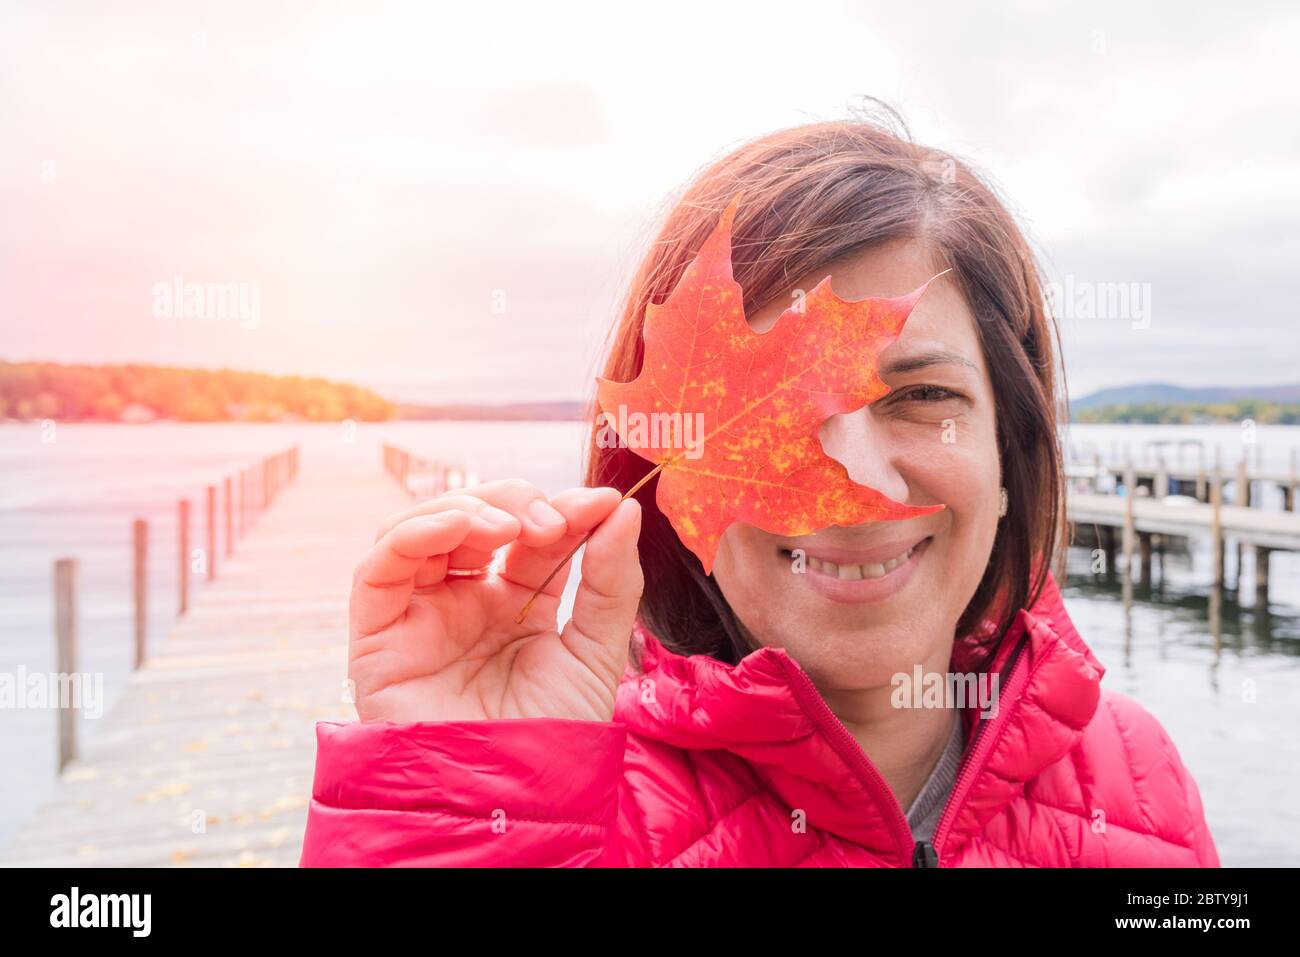 Portrain of a smiling woman holding a red maple leaf in front of her right eye. A deserted jetty on a lake is visible in background. Stock Photo